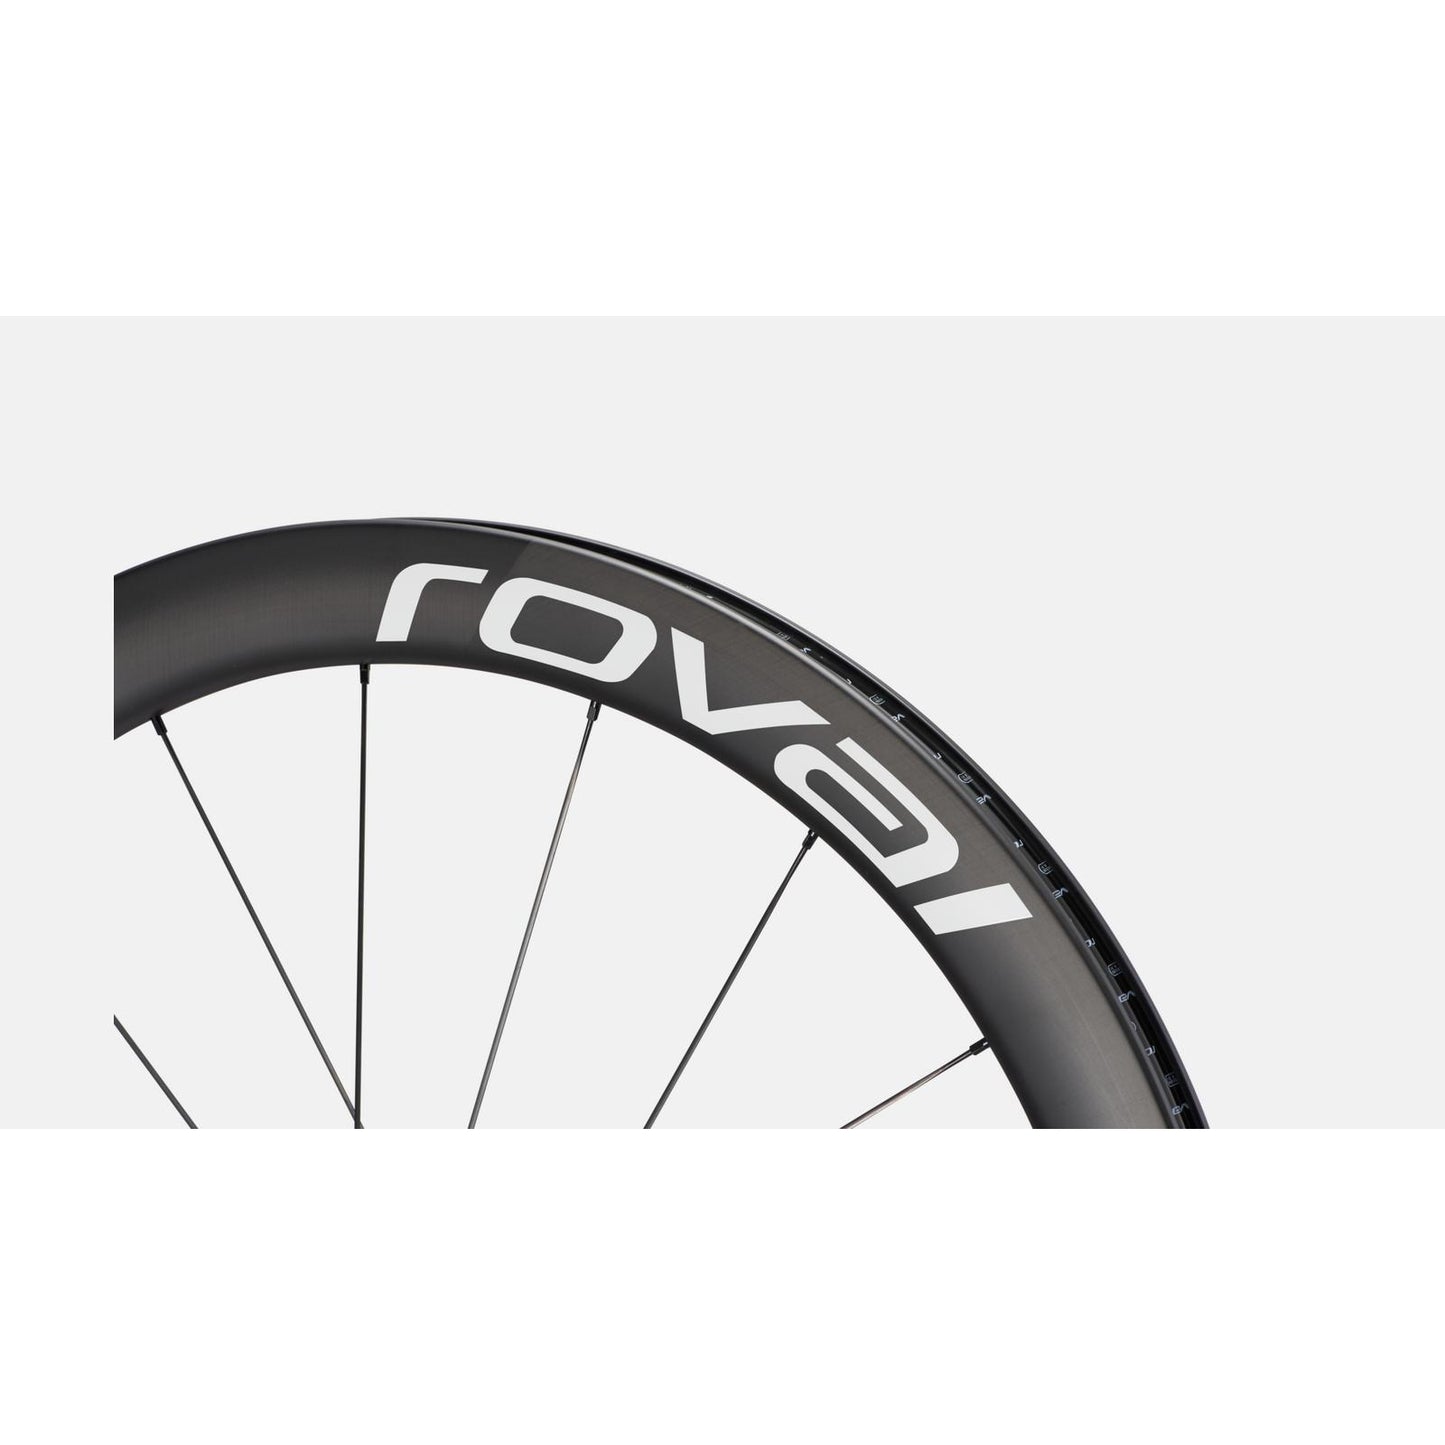 Specialized Roval Rapide CLX II - Bicycle Rims - Bicycle Warehouse